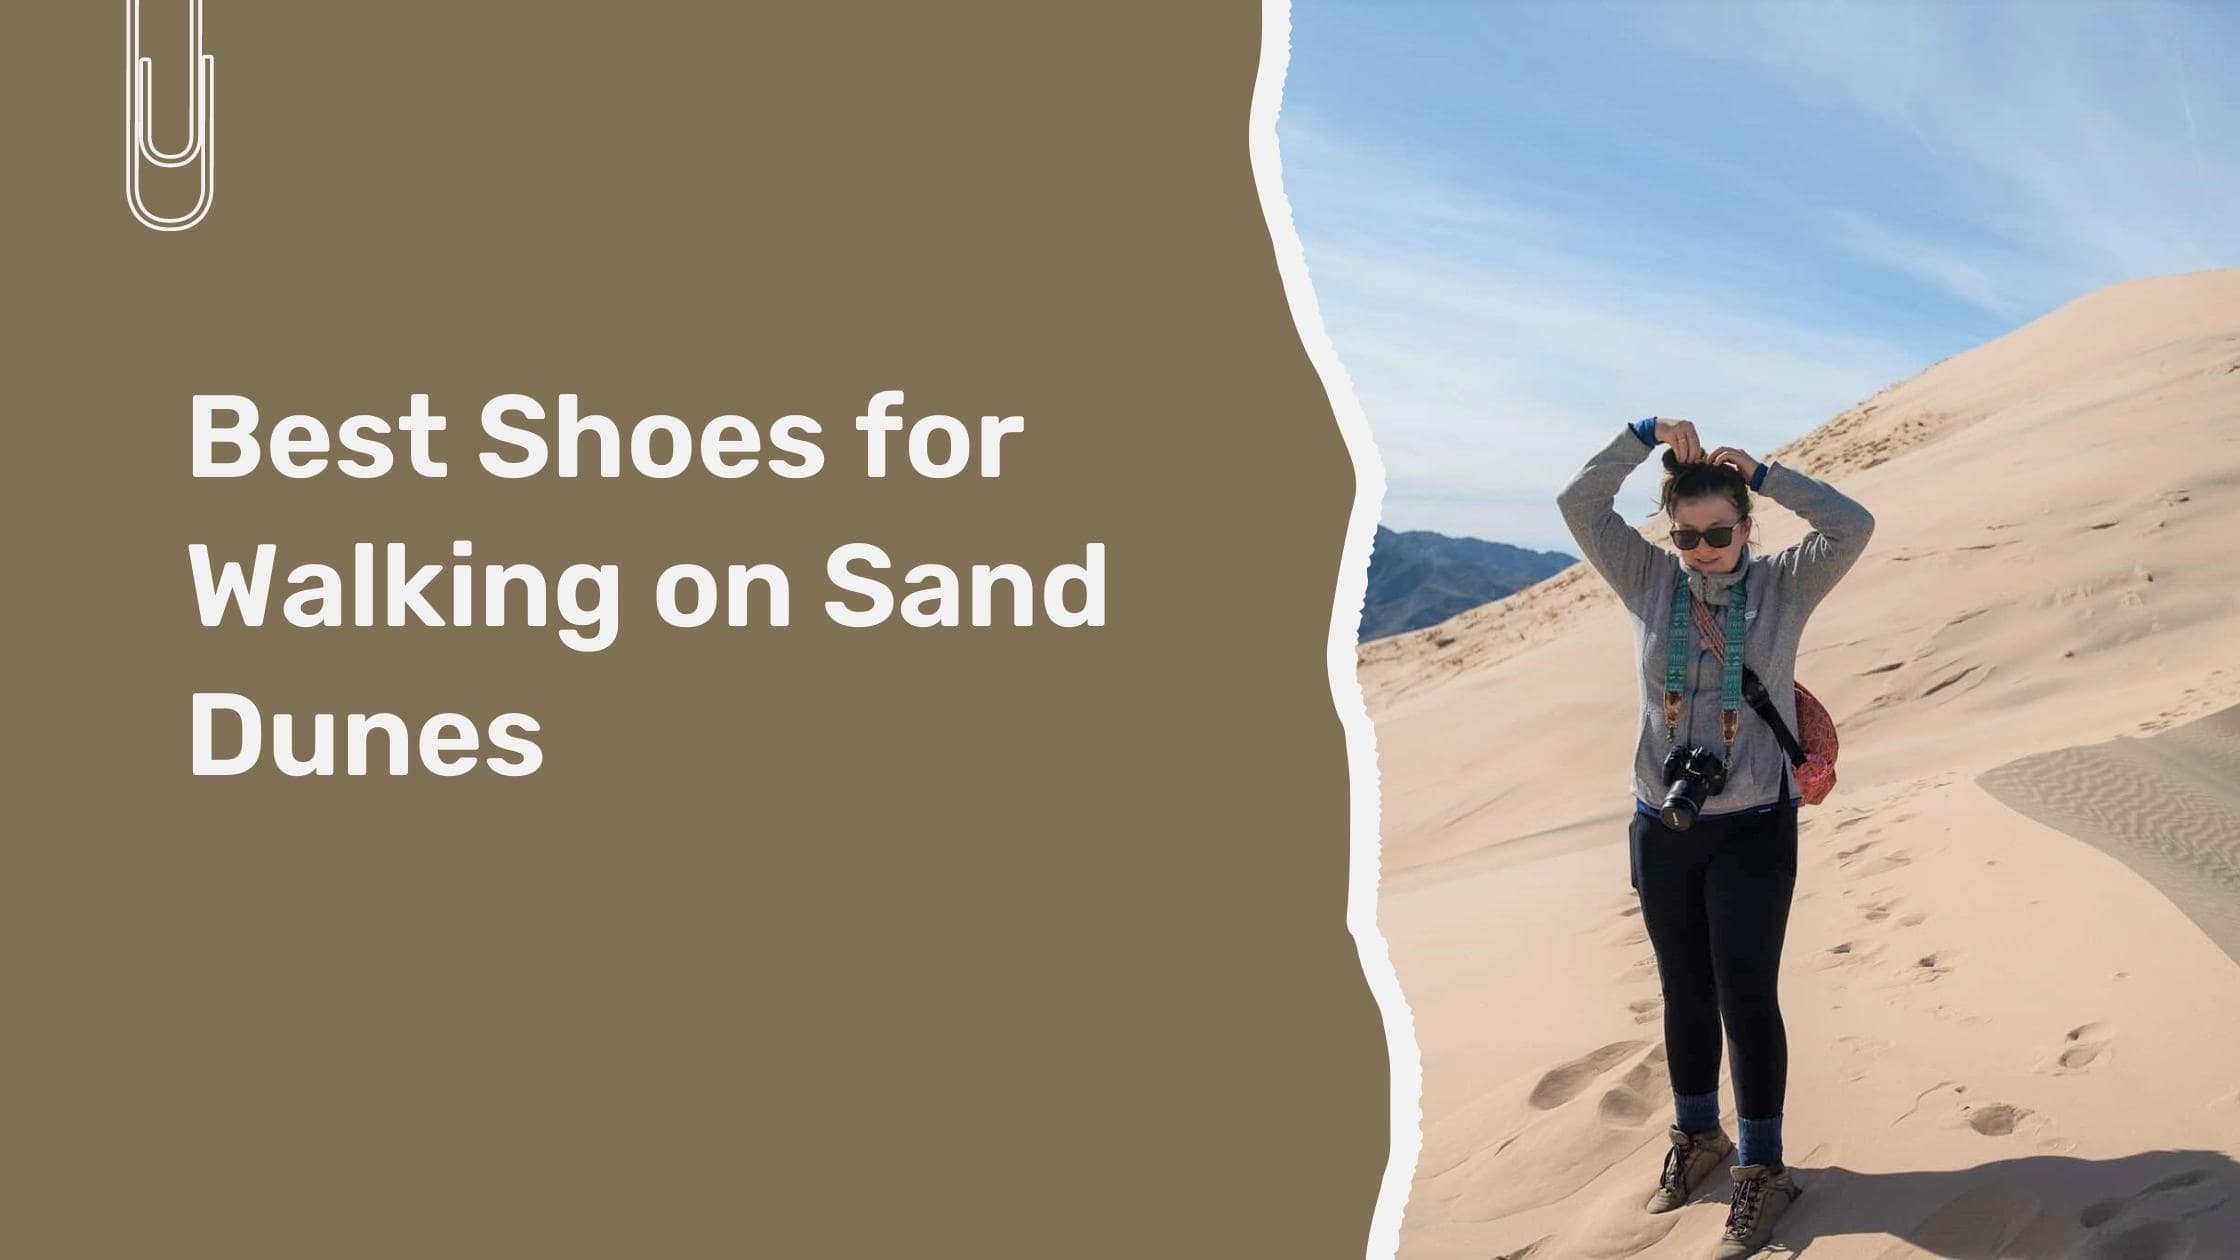 Best Shoes for Walking on Sand Dunes